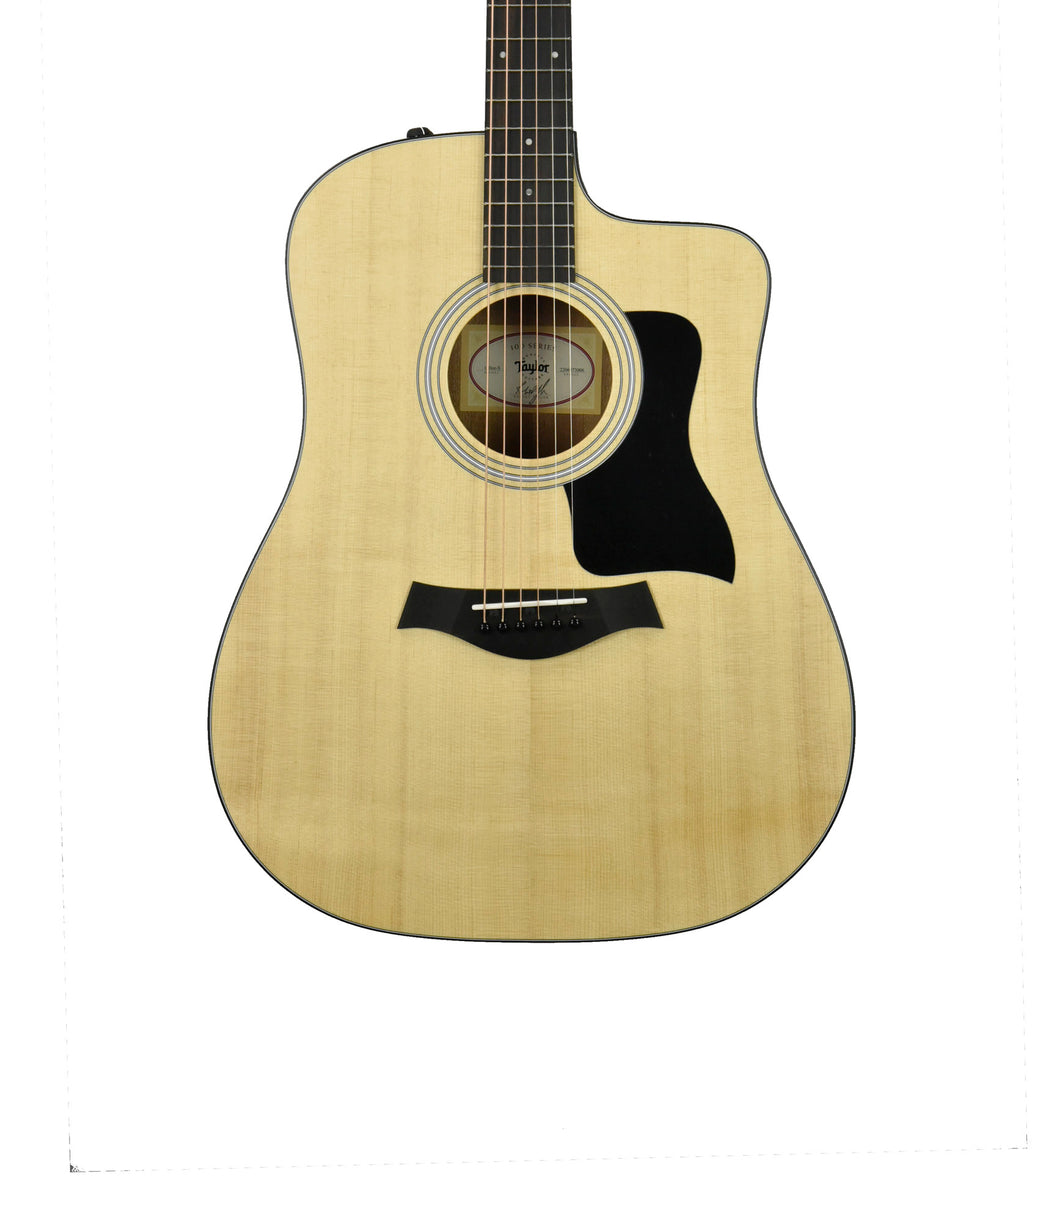 Taylor 110ce-S Acoustic-Electric Guitar in Natural 2206073006 - The Music Gallery